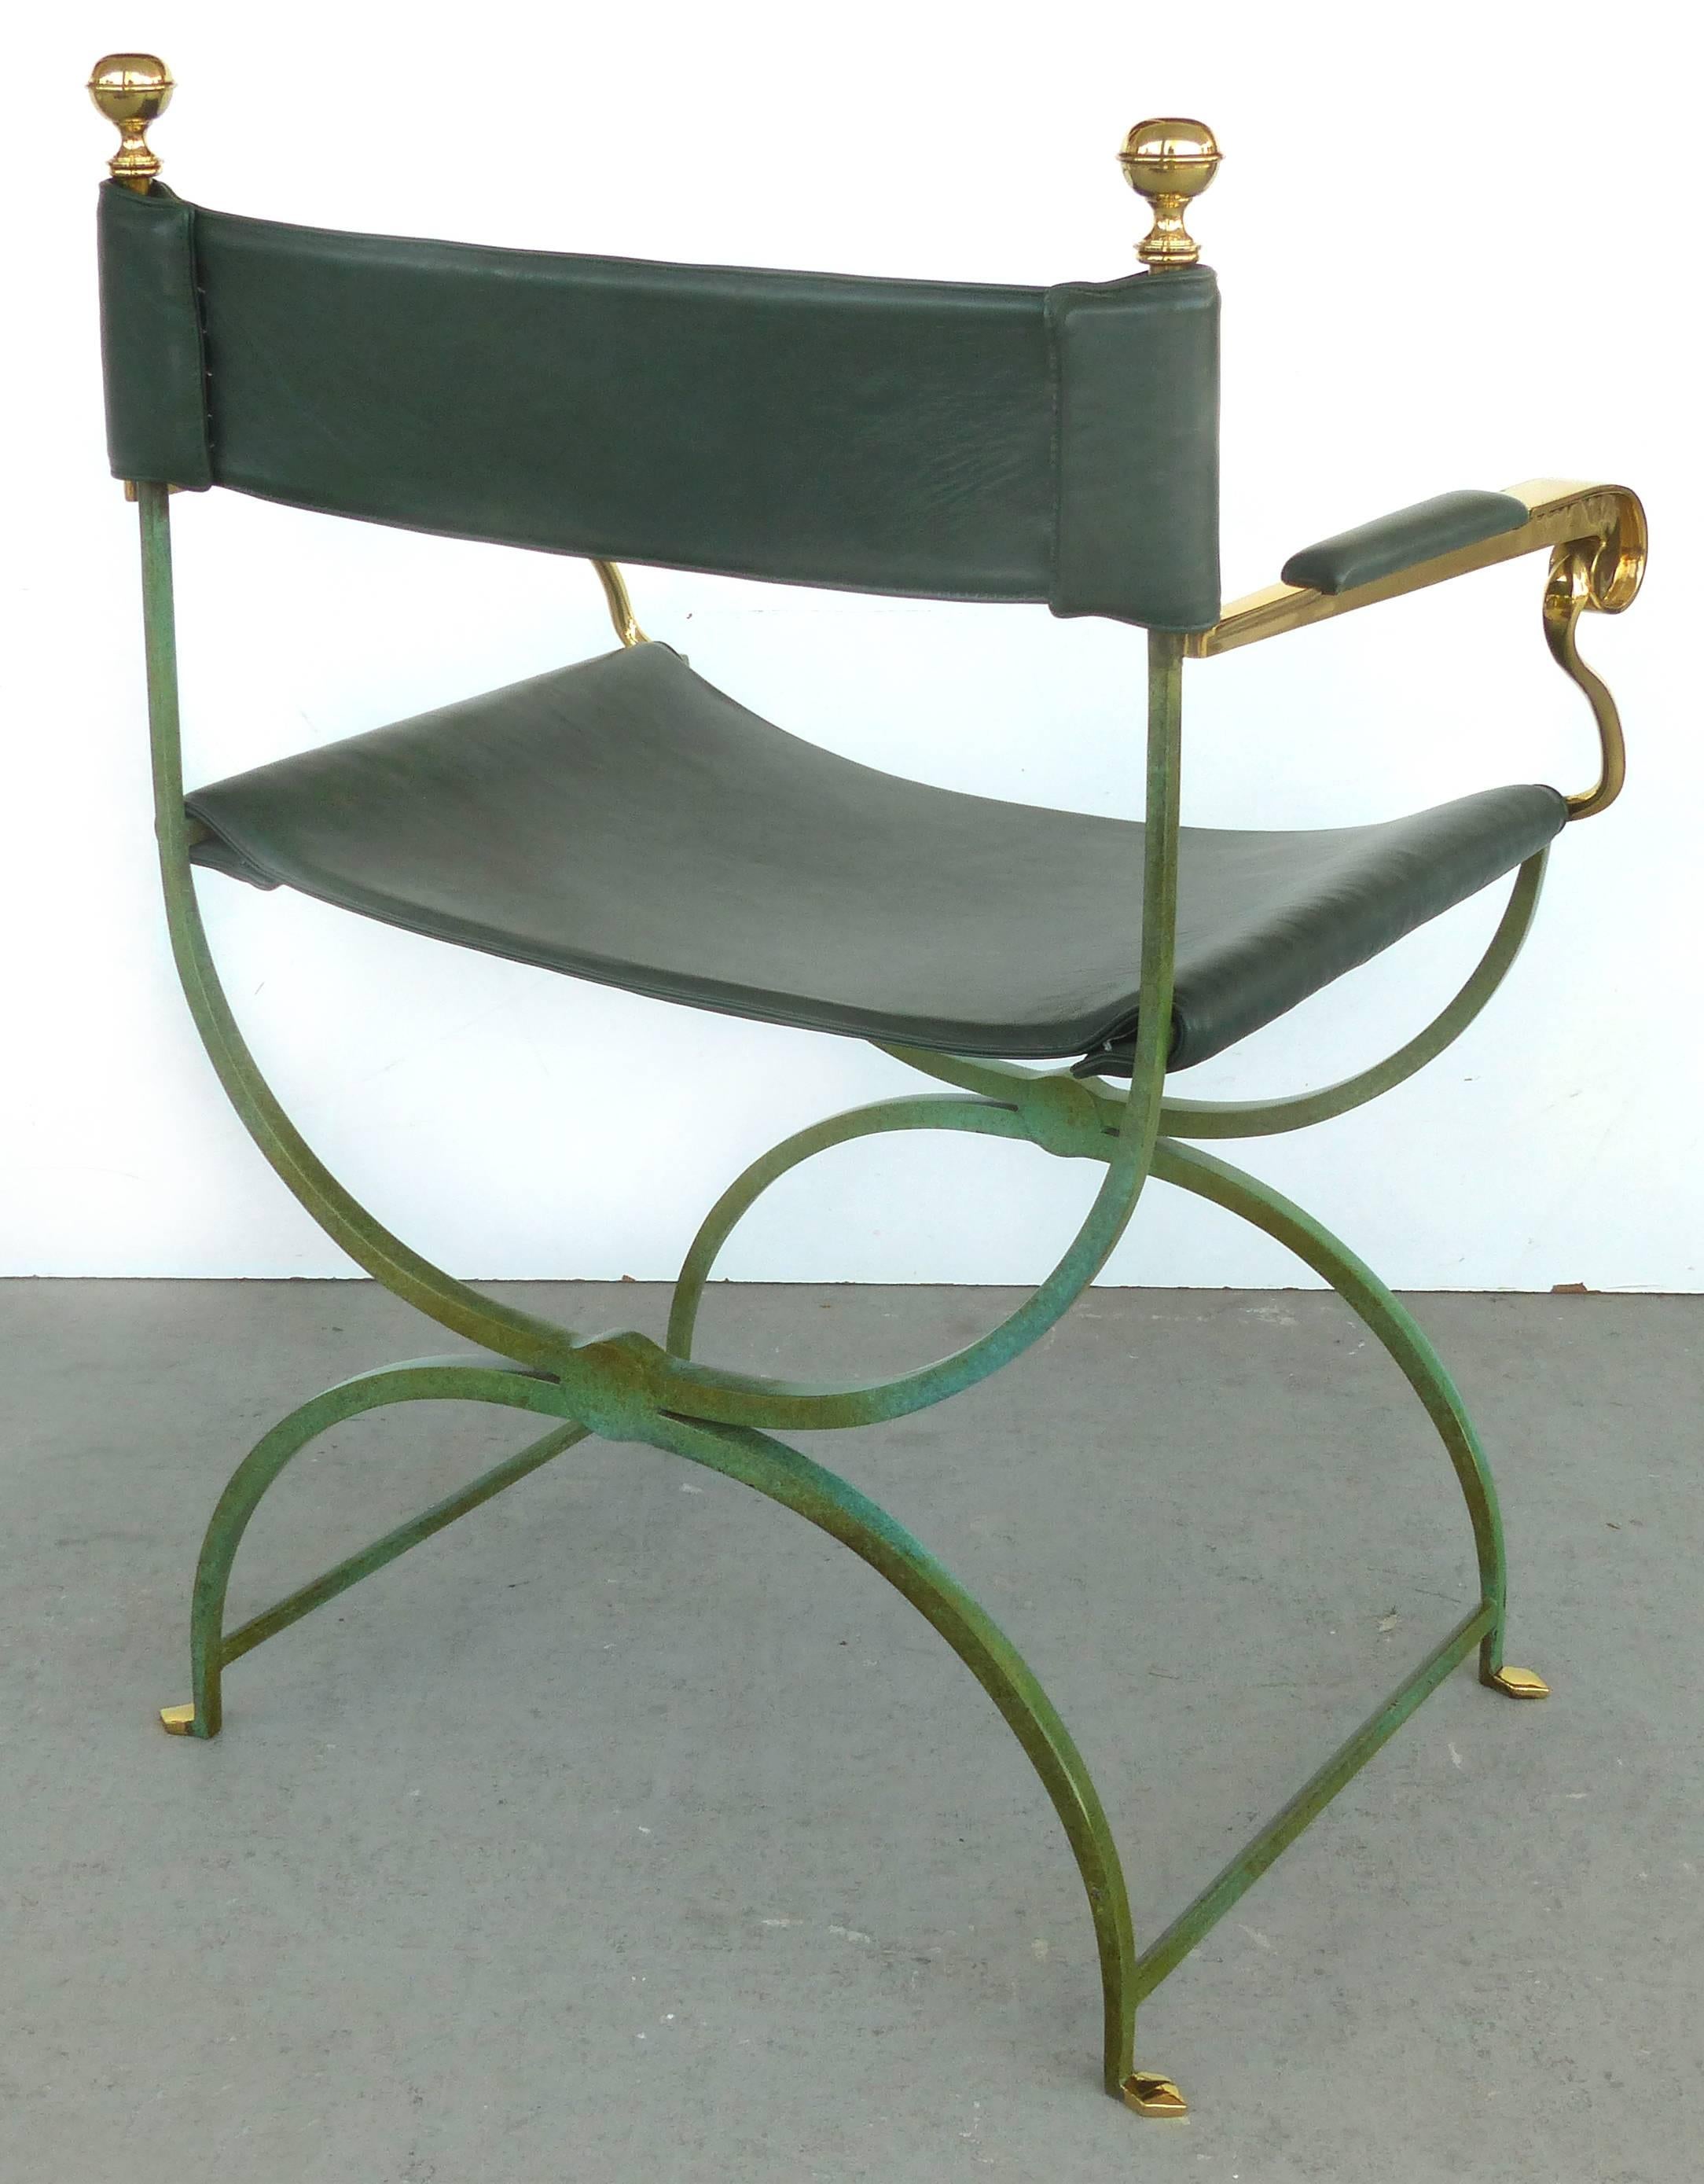 Patinated Pair of Brass Director's Chairs by Valenti, Spain